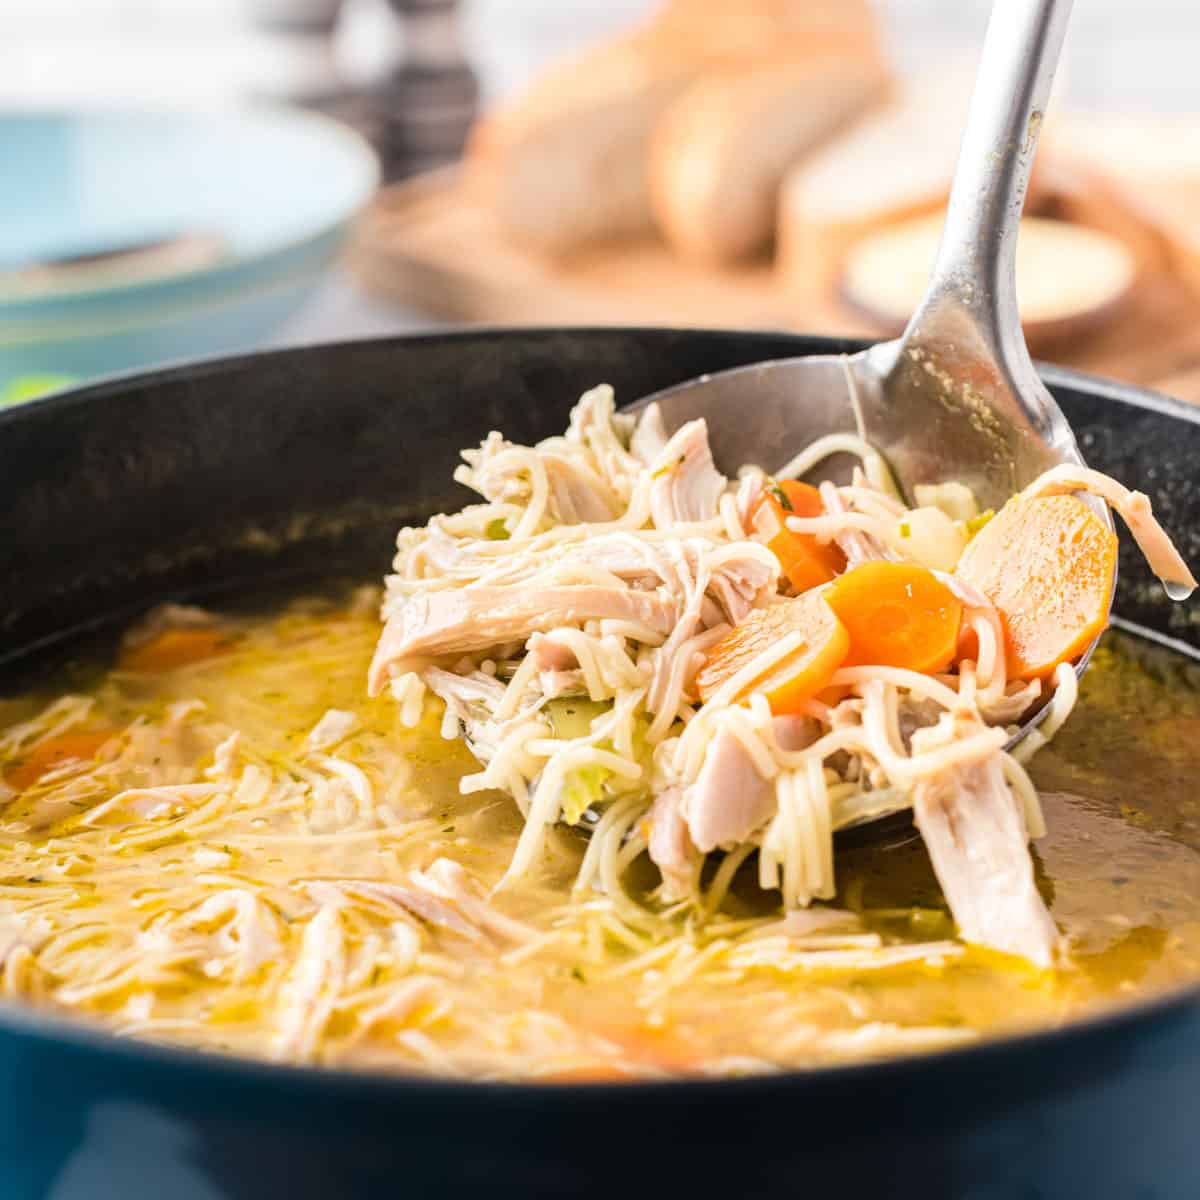 A large ladle of chicken noodle soup with chunks of carrots.